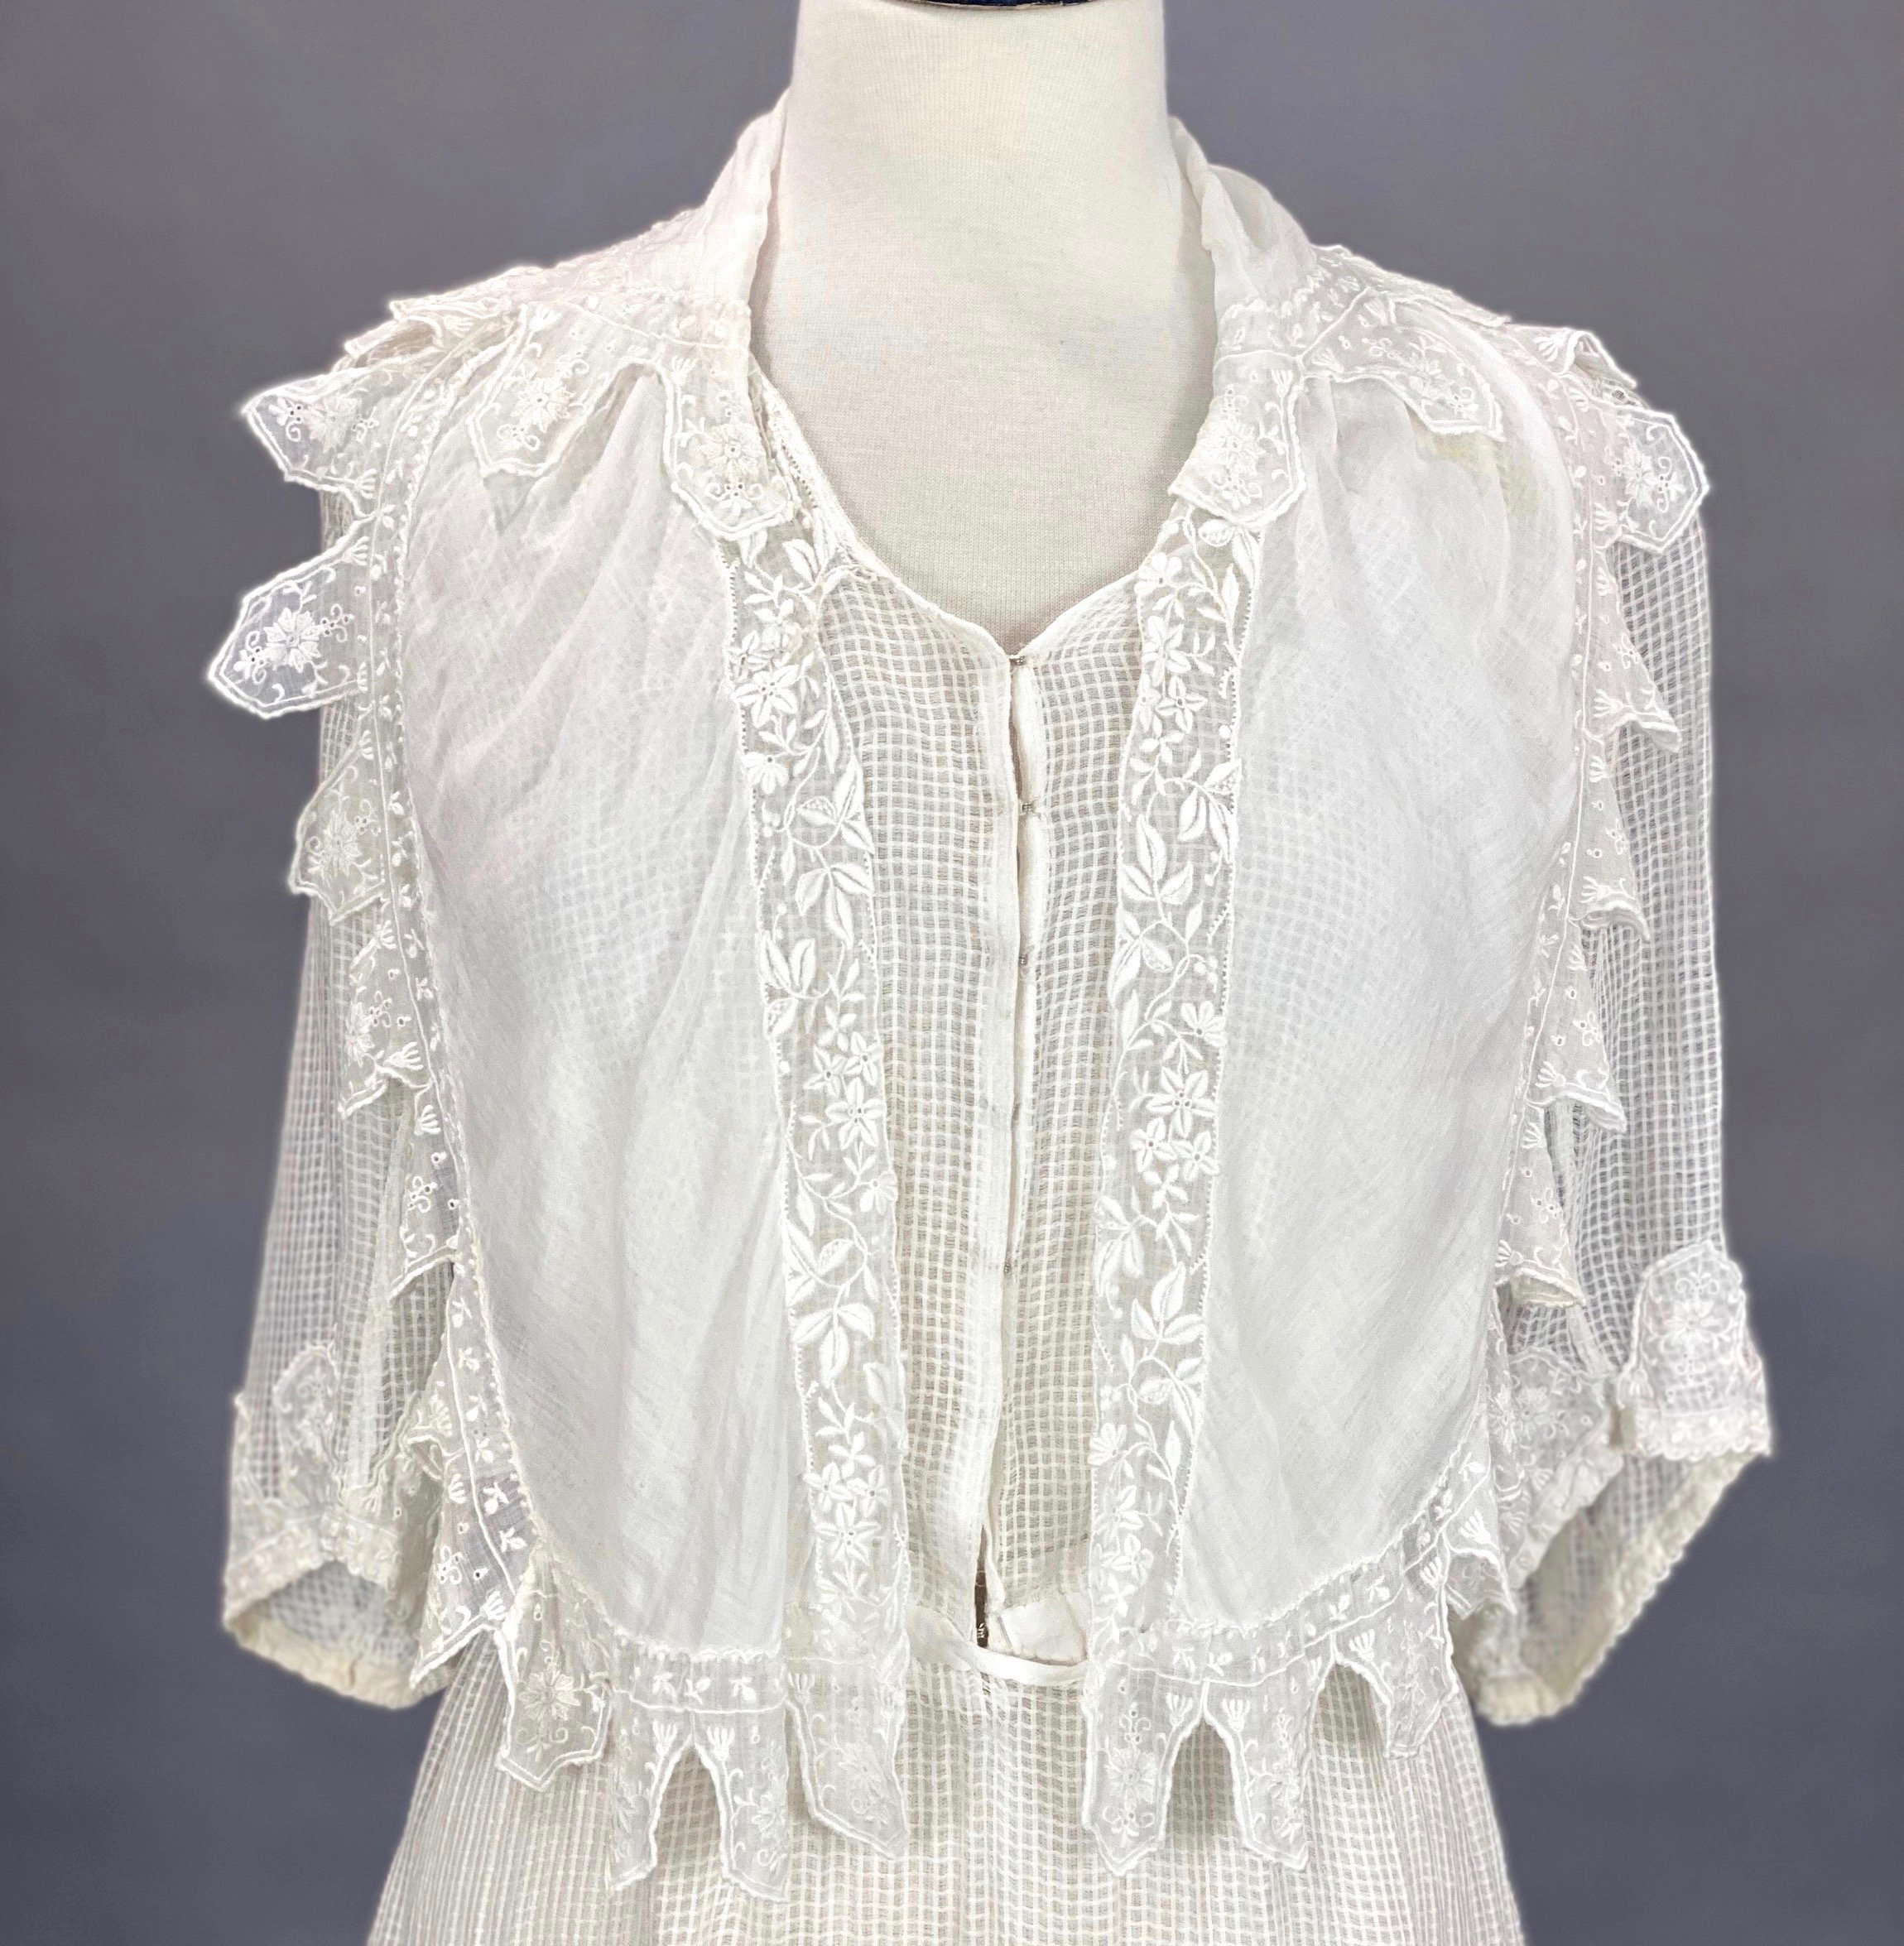 Edwardian Embroidered Dress, Antique 1910s Sheer White Cotton Lingerie ...